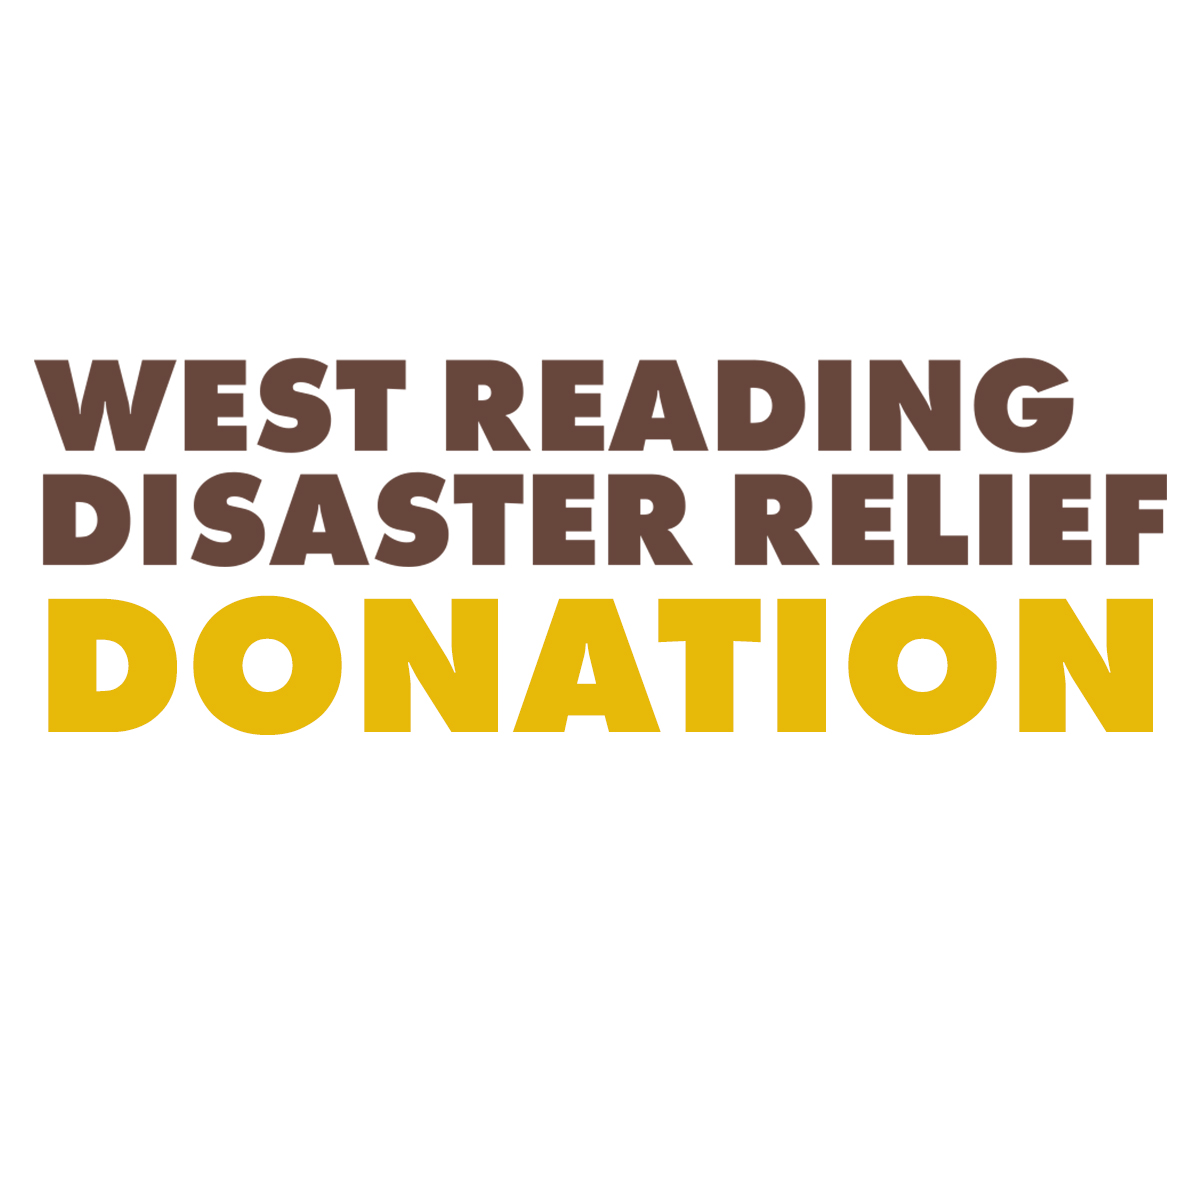 West Reading Disaster Relief Donation